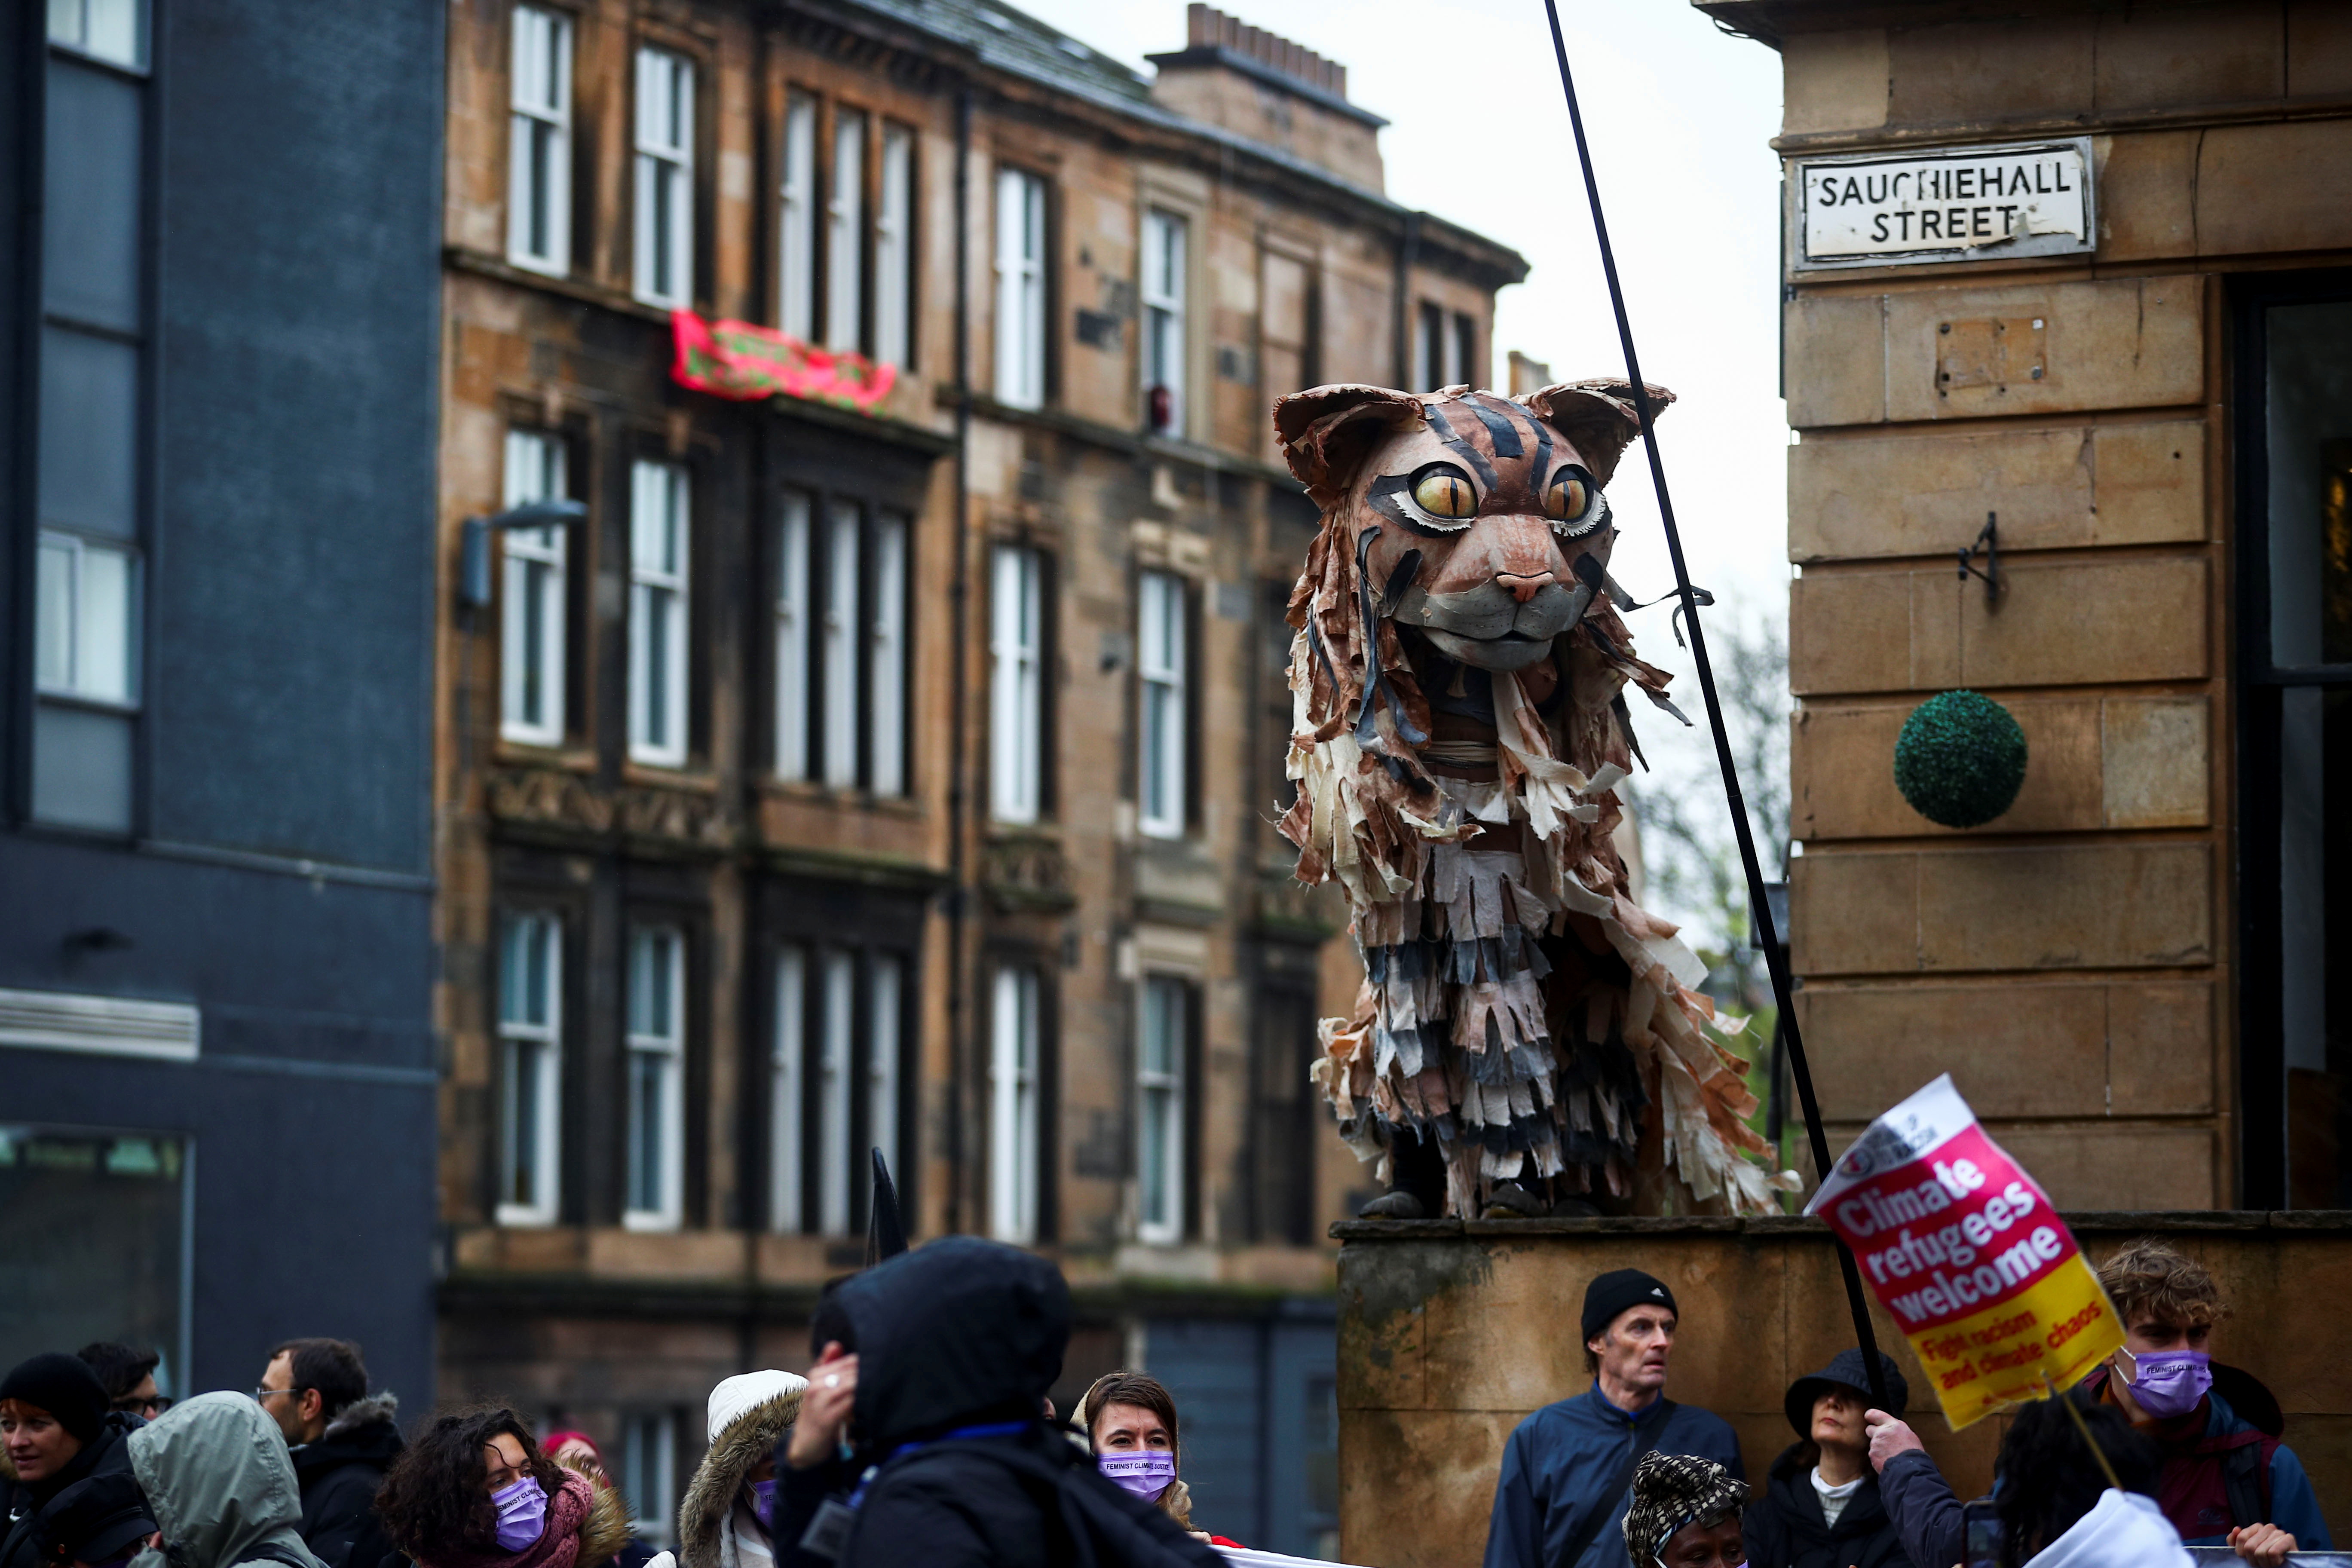 A demonstrator dressed up as a cat attends a protest as the UN Climate Change Conference (COP26) takes place, in Glasgow, Scotland, Britain, November 6, 2021. REUTERS/Hannah McKay